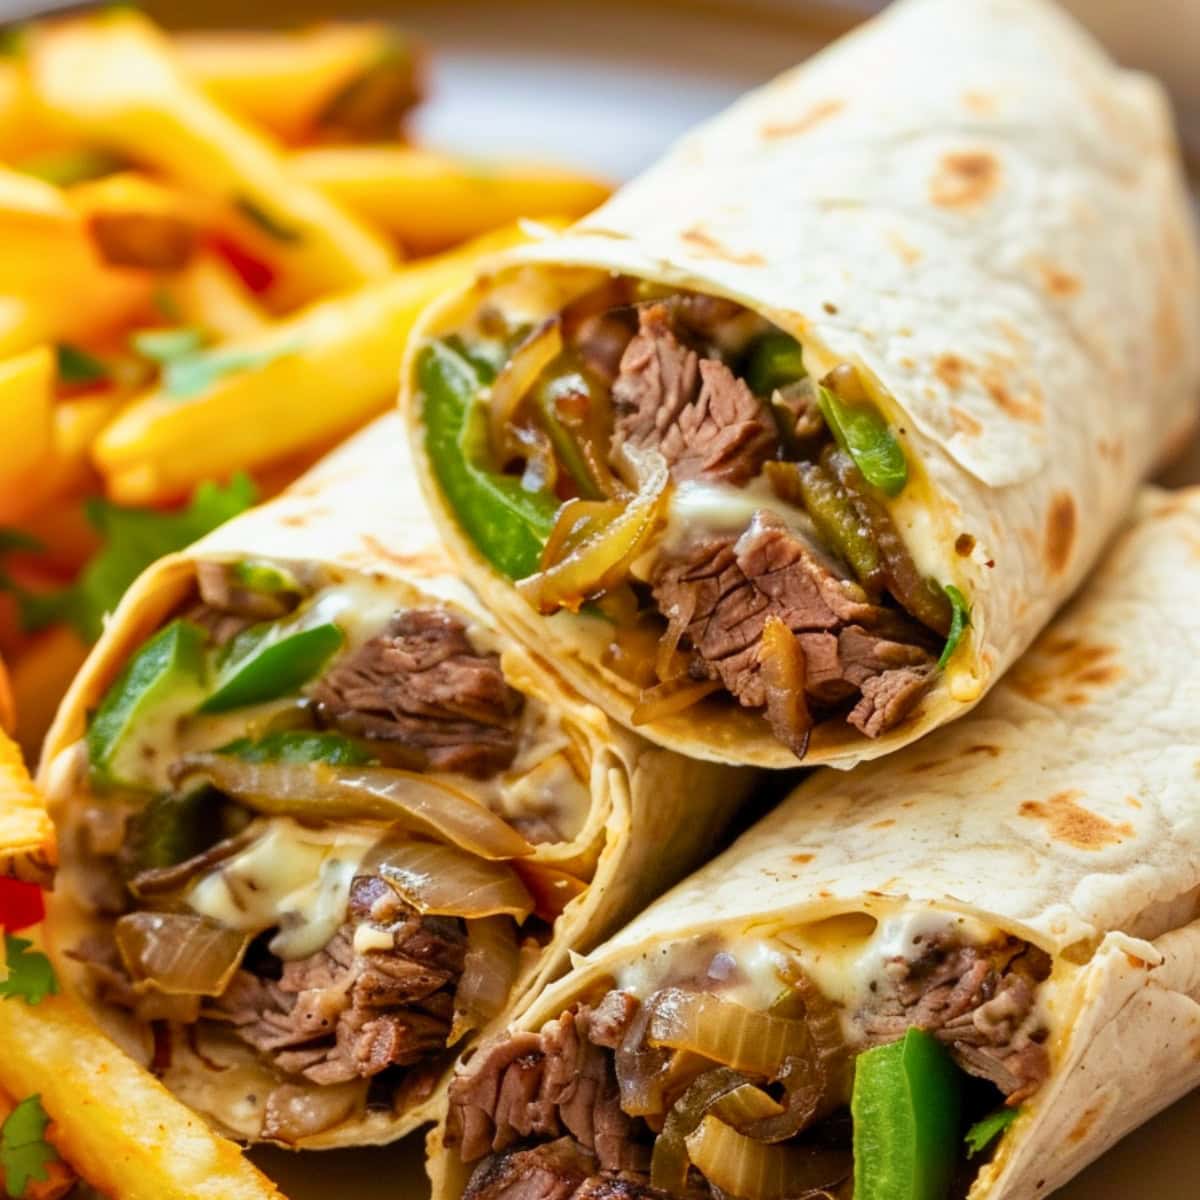 Stack of taco wrap with sauteed steak, cheese and bell pepper filling.